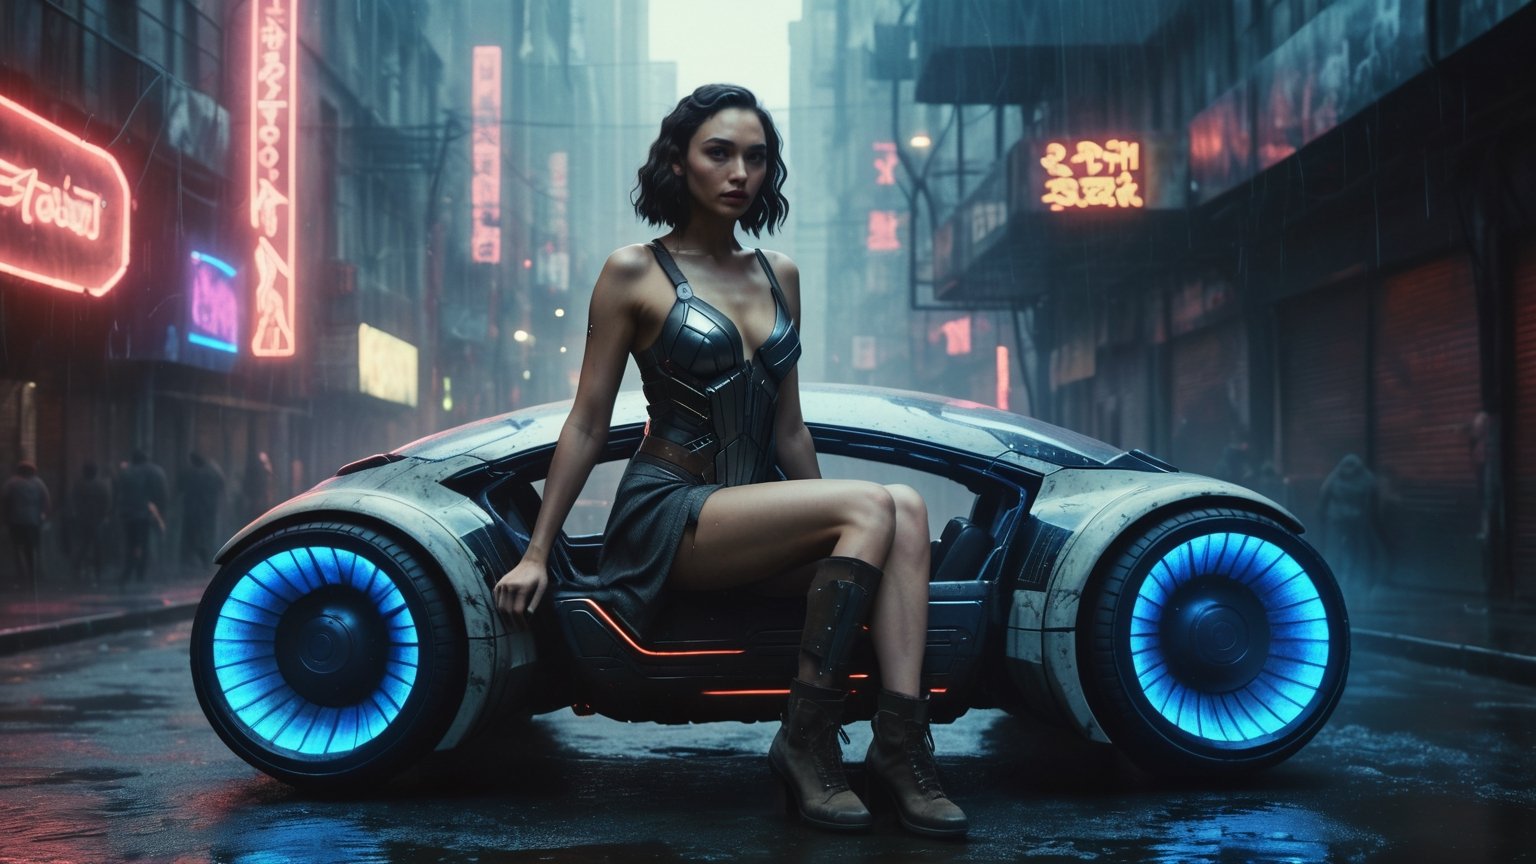 (((sexy cyberpunk android Gal Gadot sitting astride a huge cybernetic hover futuristic levitation transport with neon lights))), ((dark night vintage dystopian cyberpunk led neon waterfall in the city background)), ((lighting dust particles)), horror movie scene, best quality, masterpiece, (photorealistic:1.4), 8k uhd, dslr, masterpiece photoshoot, (in the style of Hans Heysen and Carne Griffiths),shot on Canon EOS 5D Mark IV DSLR, 85mm lens, long exposure time, f/8, ISO 100, shutter speed 1/125, award winning photograph, facing camera, perfect contrast,cinematic style